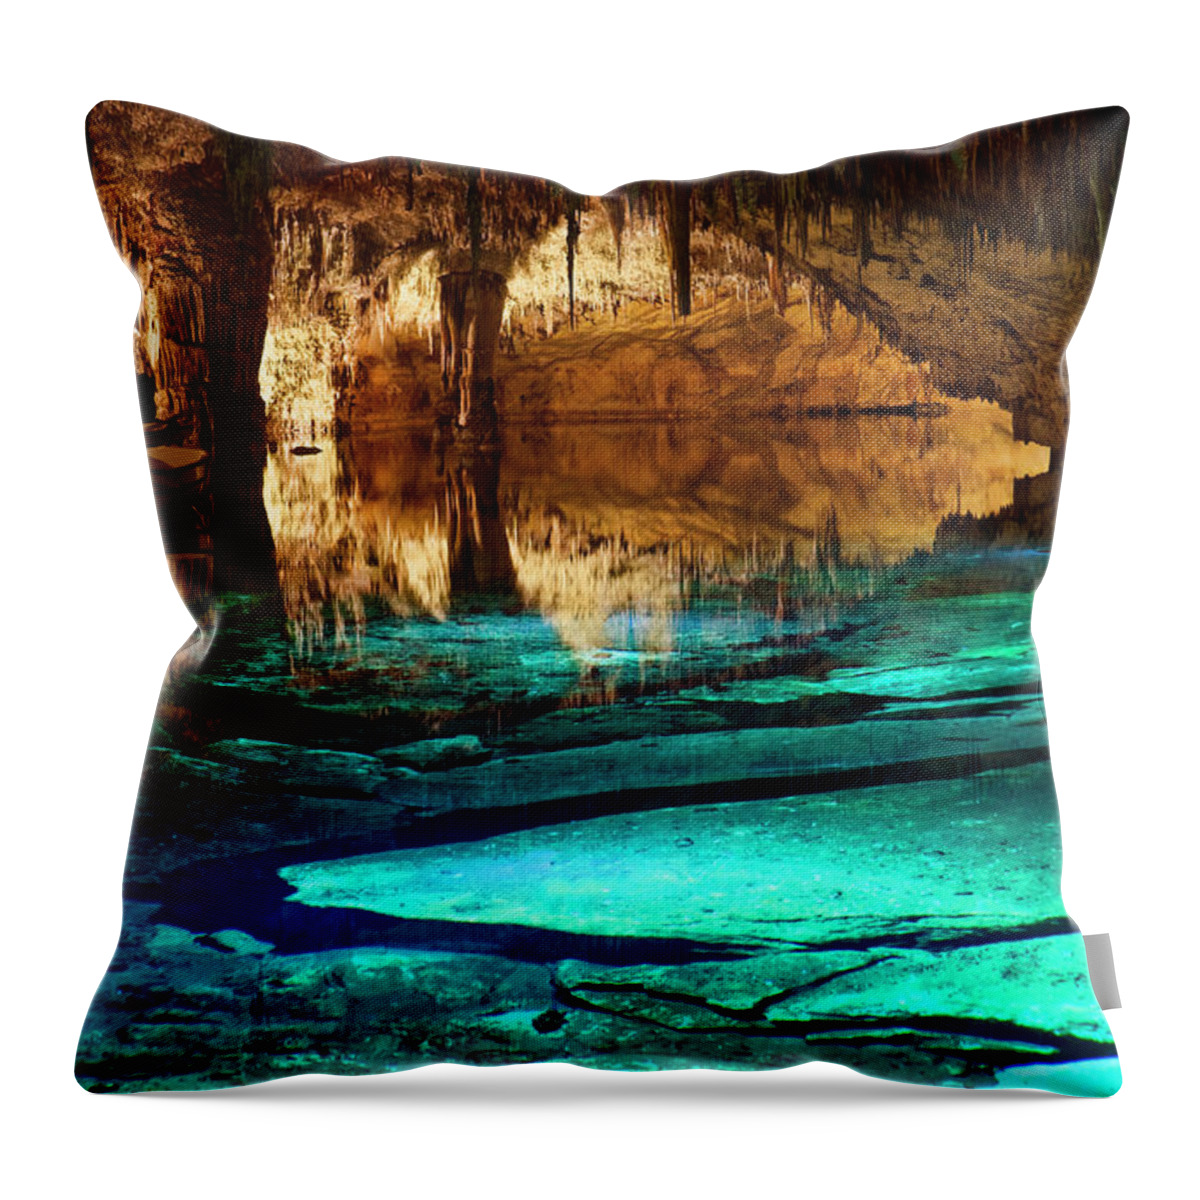 Tranquility Throw Pillow featuring the photograph Drach Caves by Gonzalo Azumendi